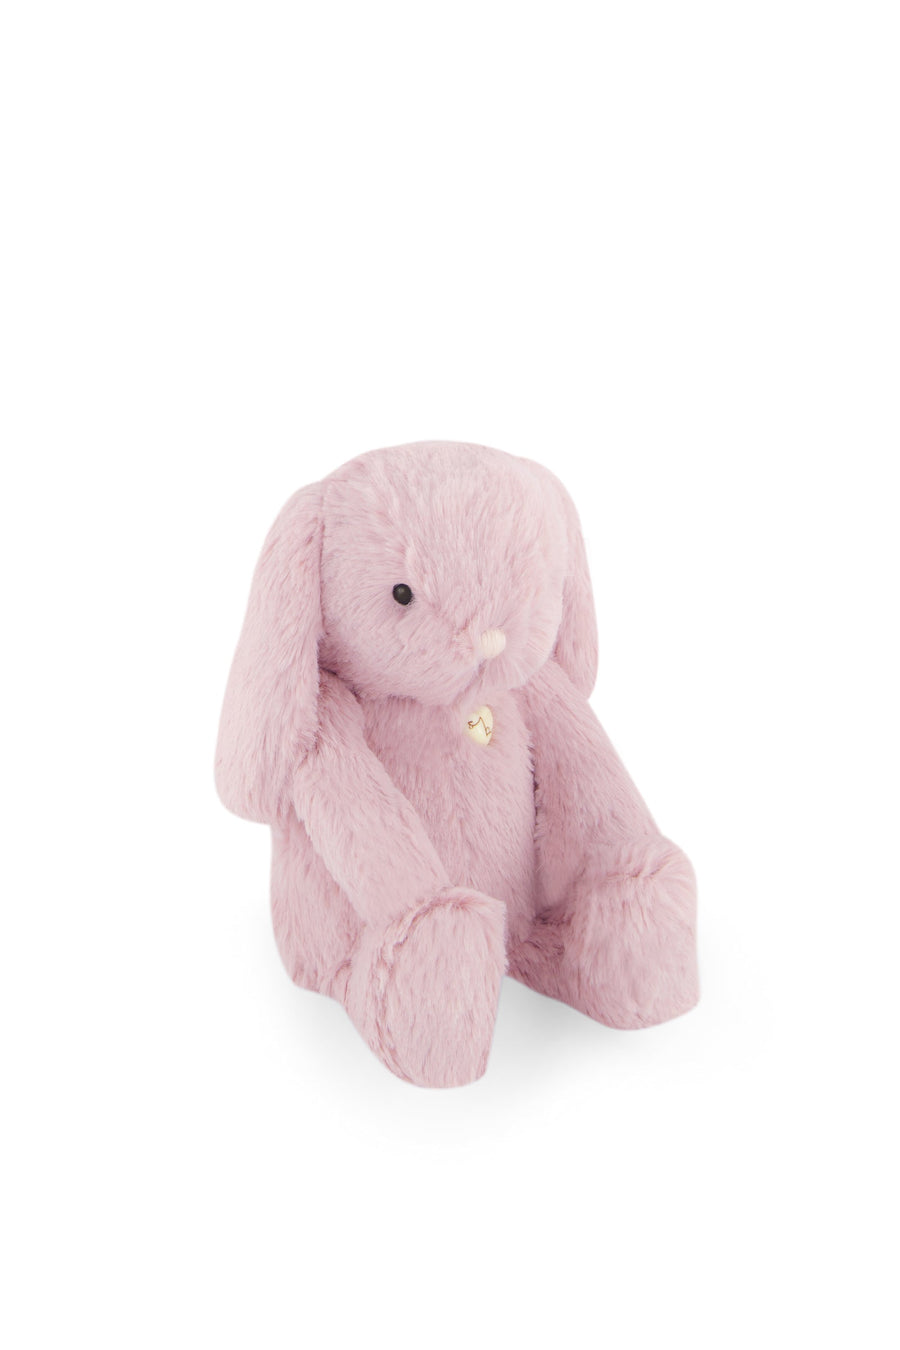 Snuggle Bunnies - Penelope the Bunny - Powder Pink Childrens Toy from Jamie Kay NZ